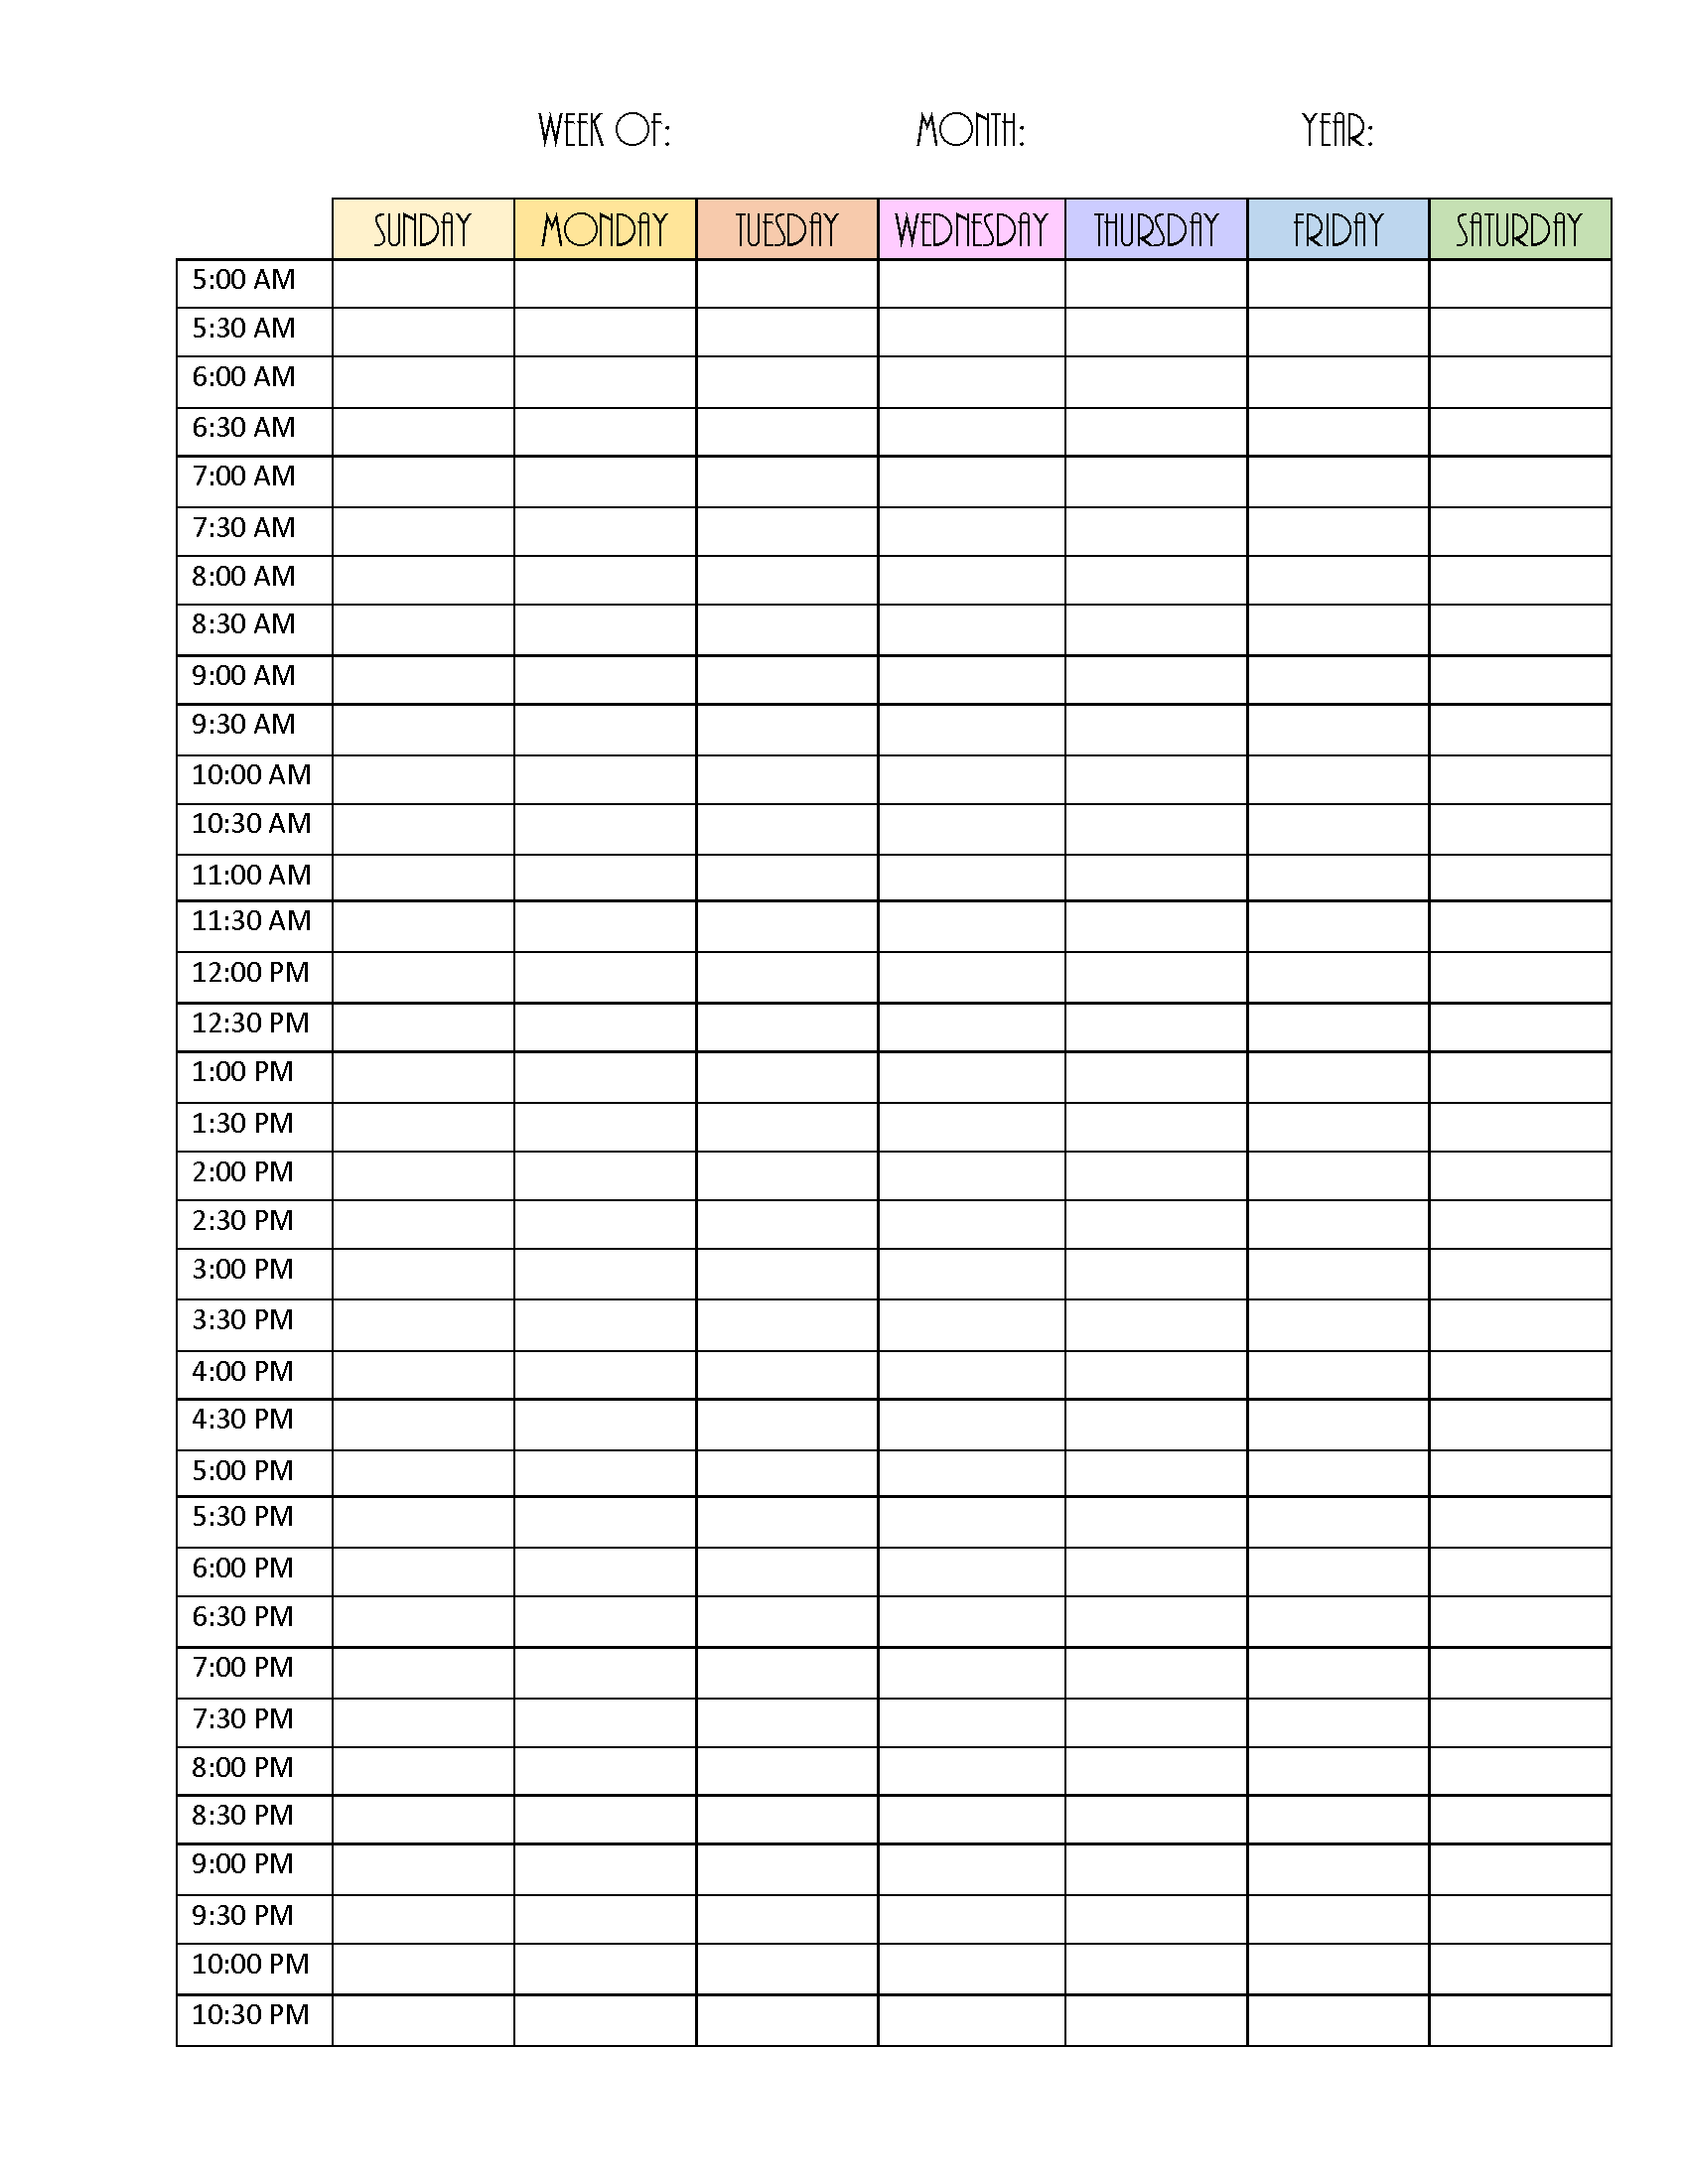 blank daily time schedule